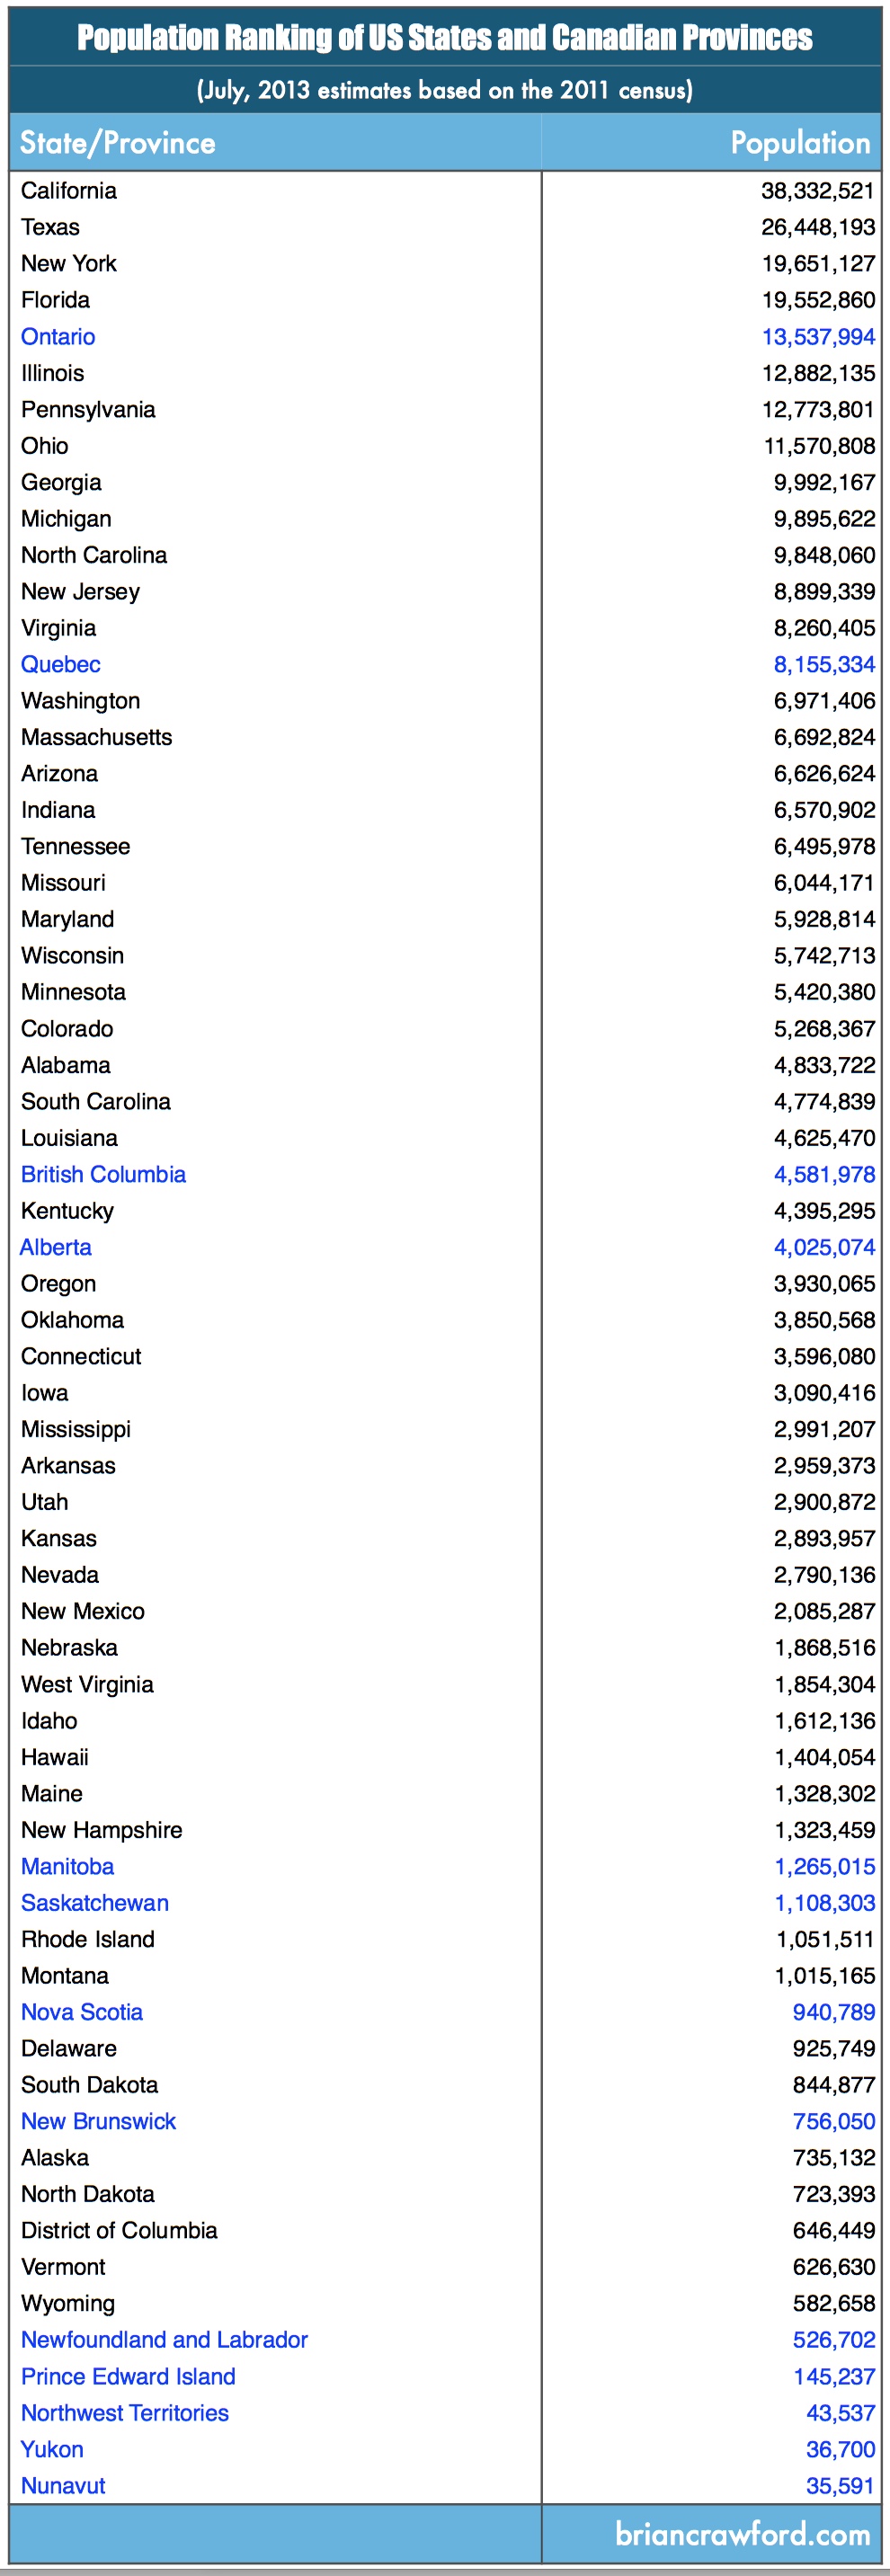 US and Canada population ranking